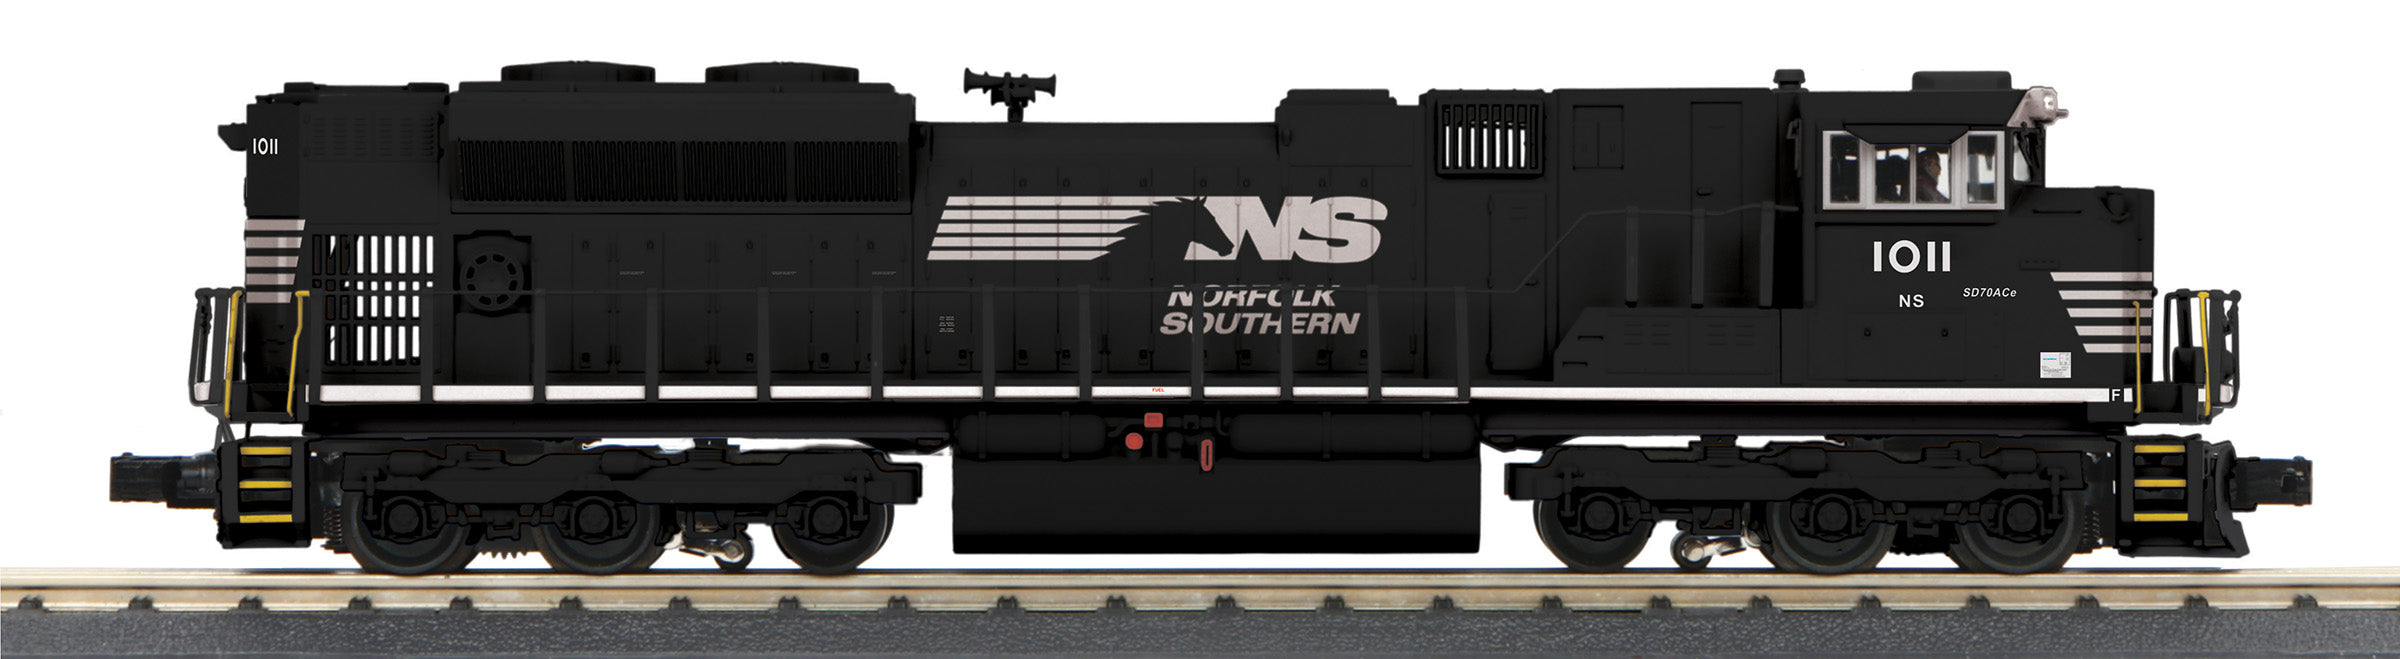 MTH 30-21228-1 - SD70ACe Imperial Diesel Engine "Norfolk Southern" #1011 w/ PS3